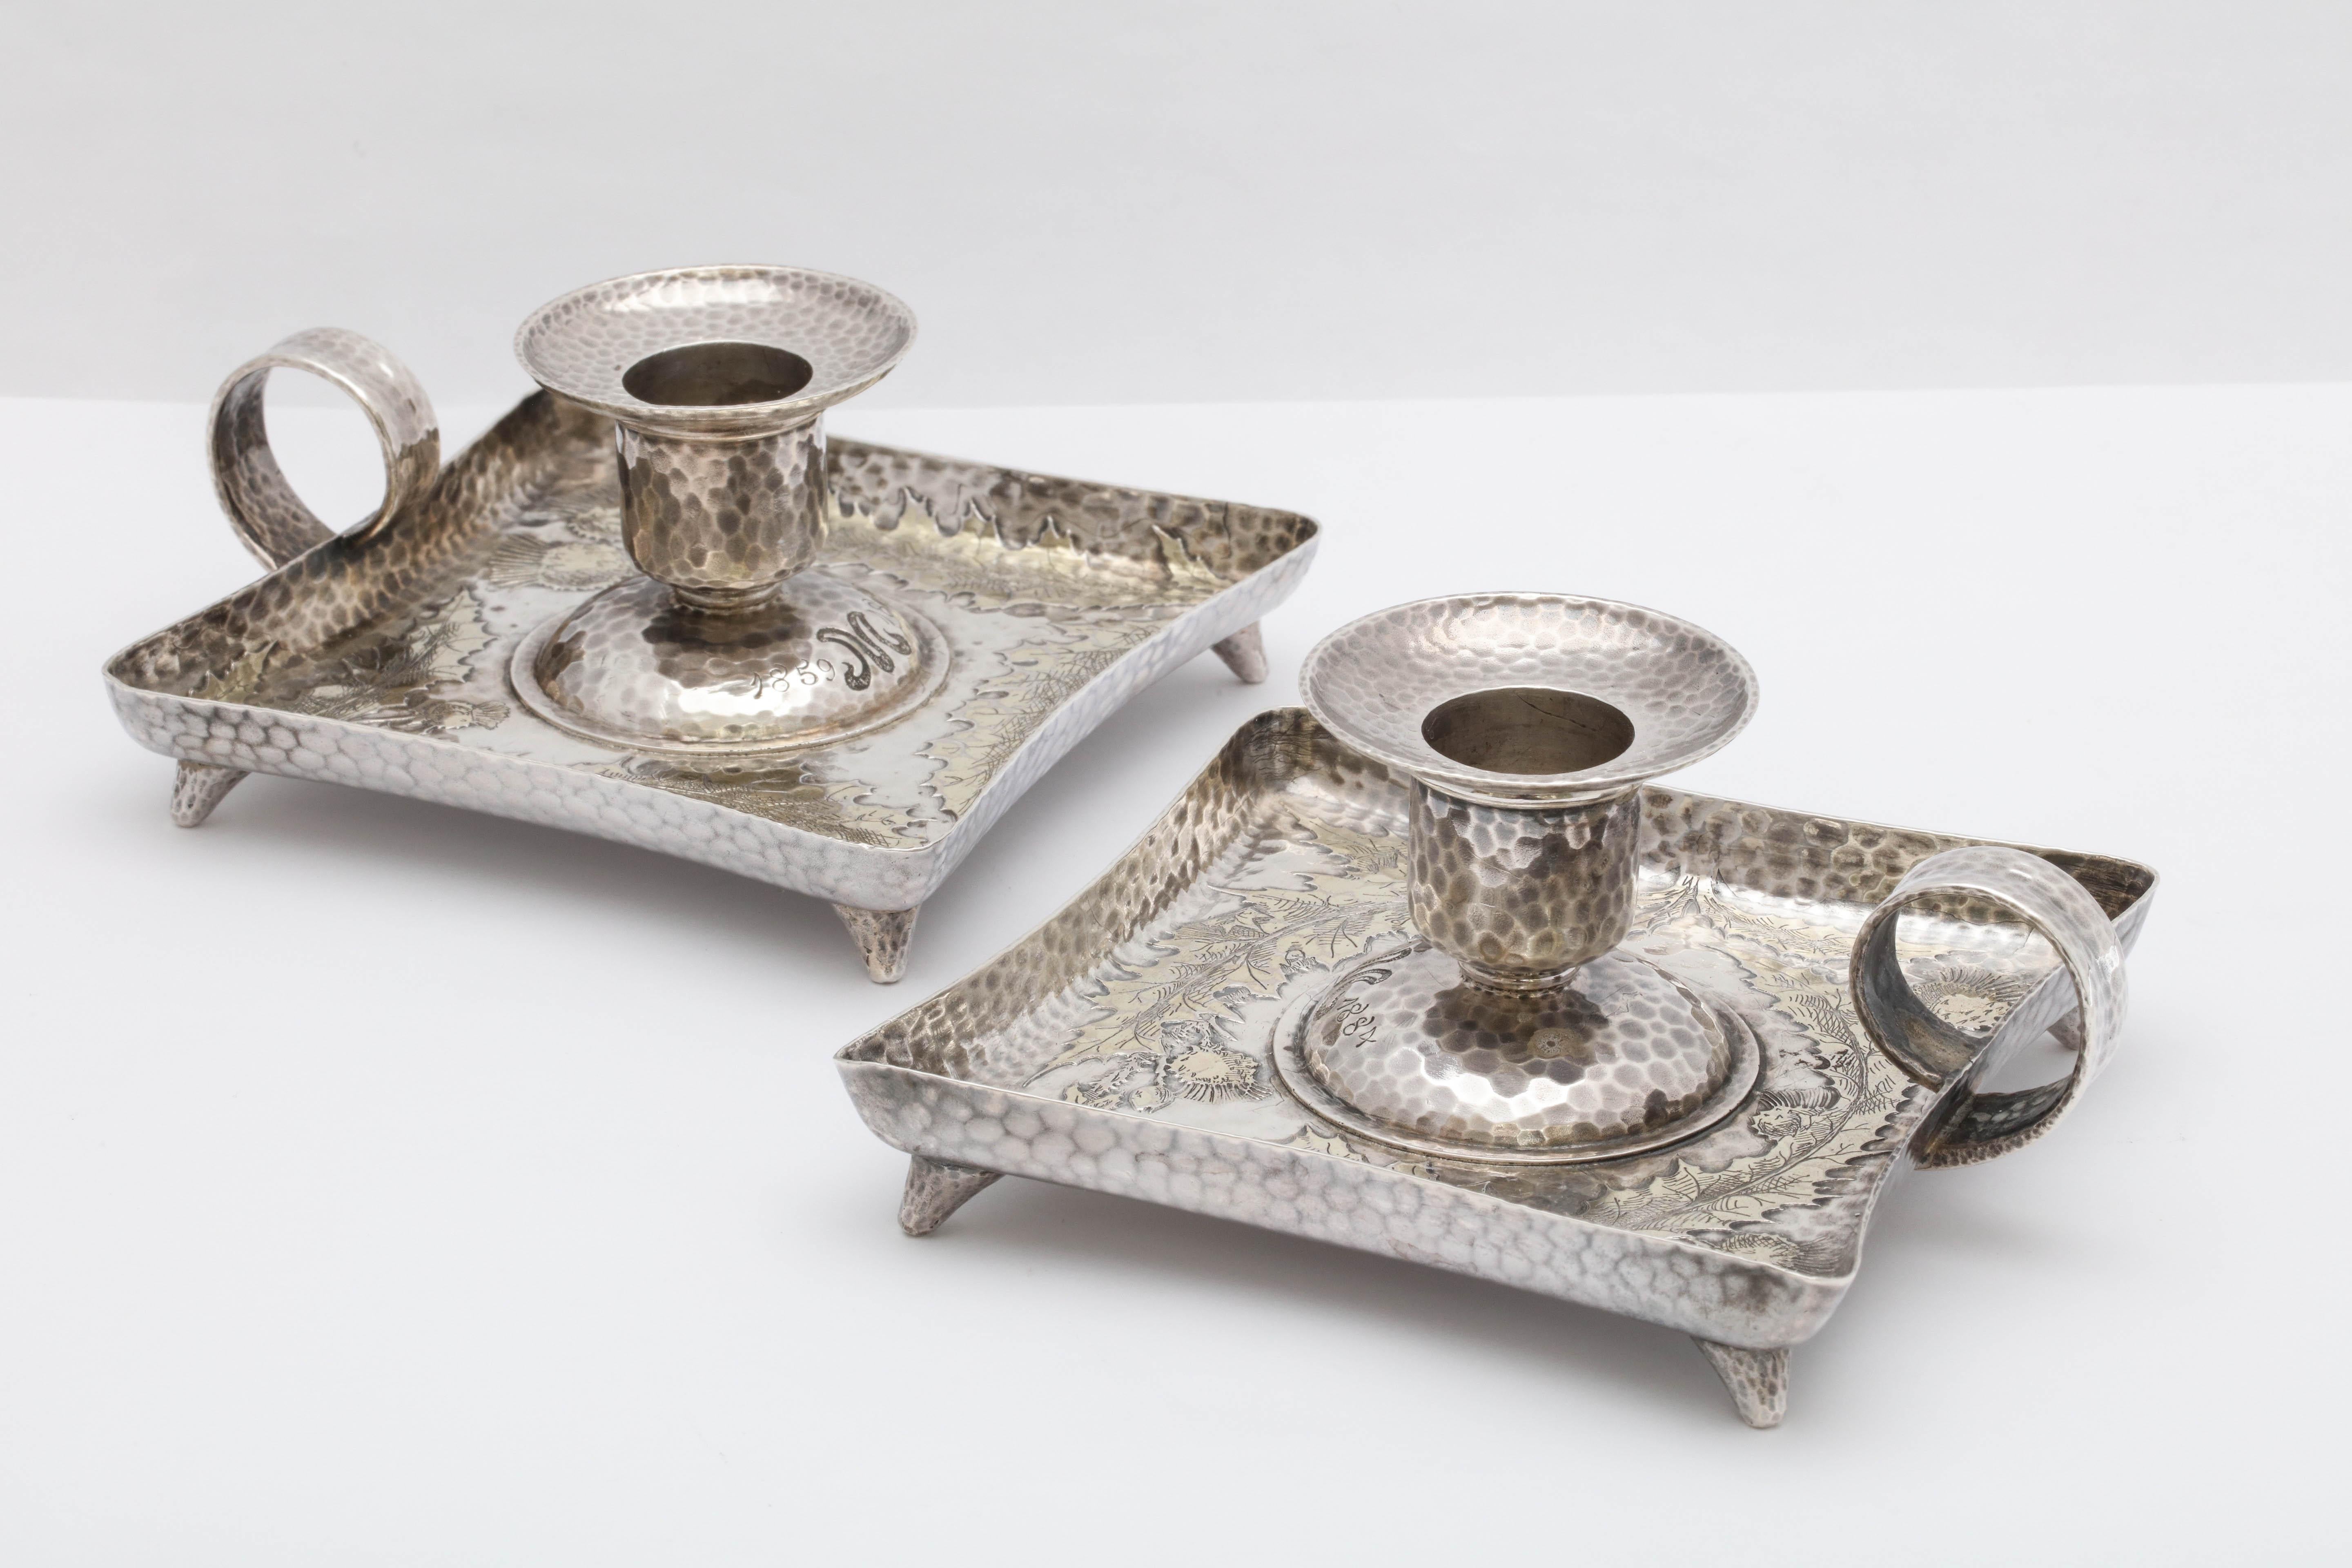 Rare pair of Victorian, parcel-Gilt, footed, sterling silver, square based chamber candlesticks by Tiffany and Company, New York, inventory marked for the year 1882. Silver is hammered in design and has gilded thistles. Removable bobeches. Each is